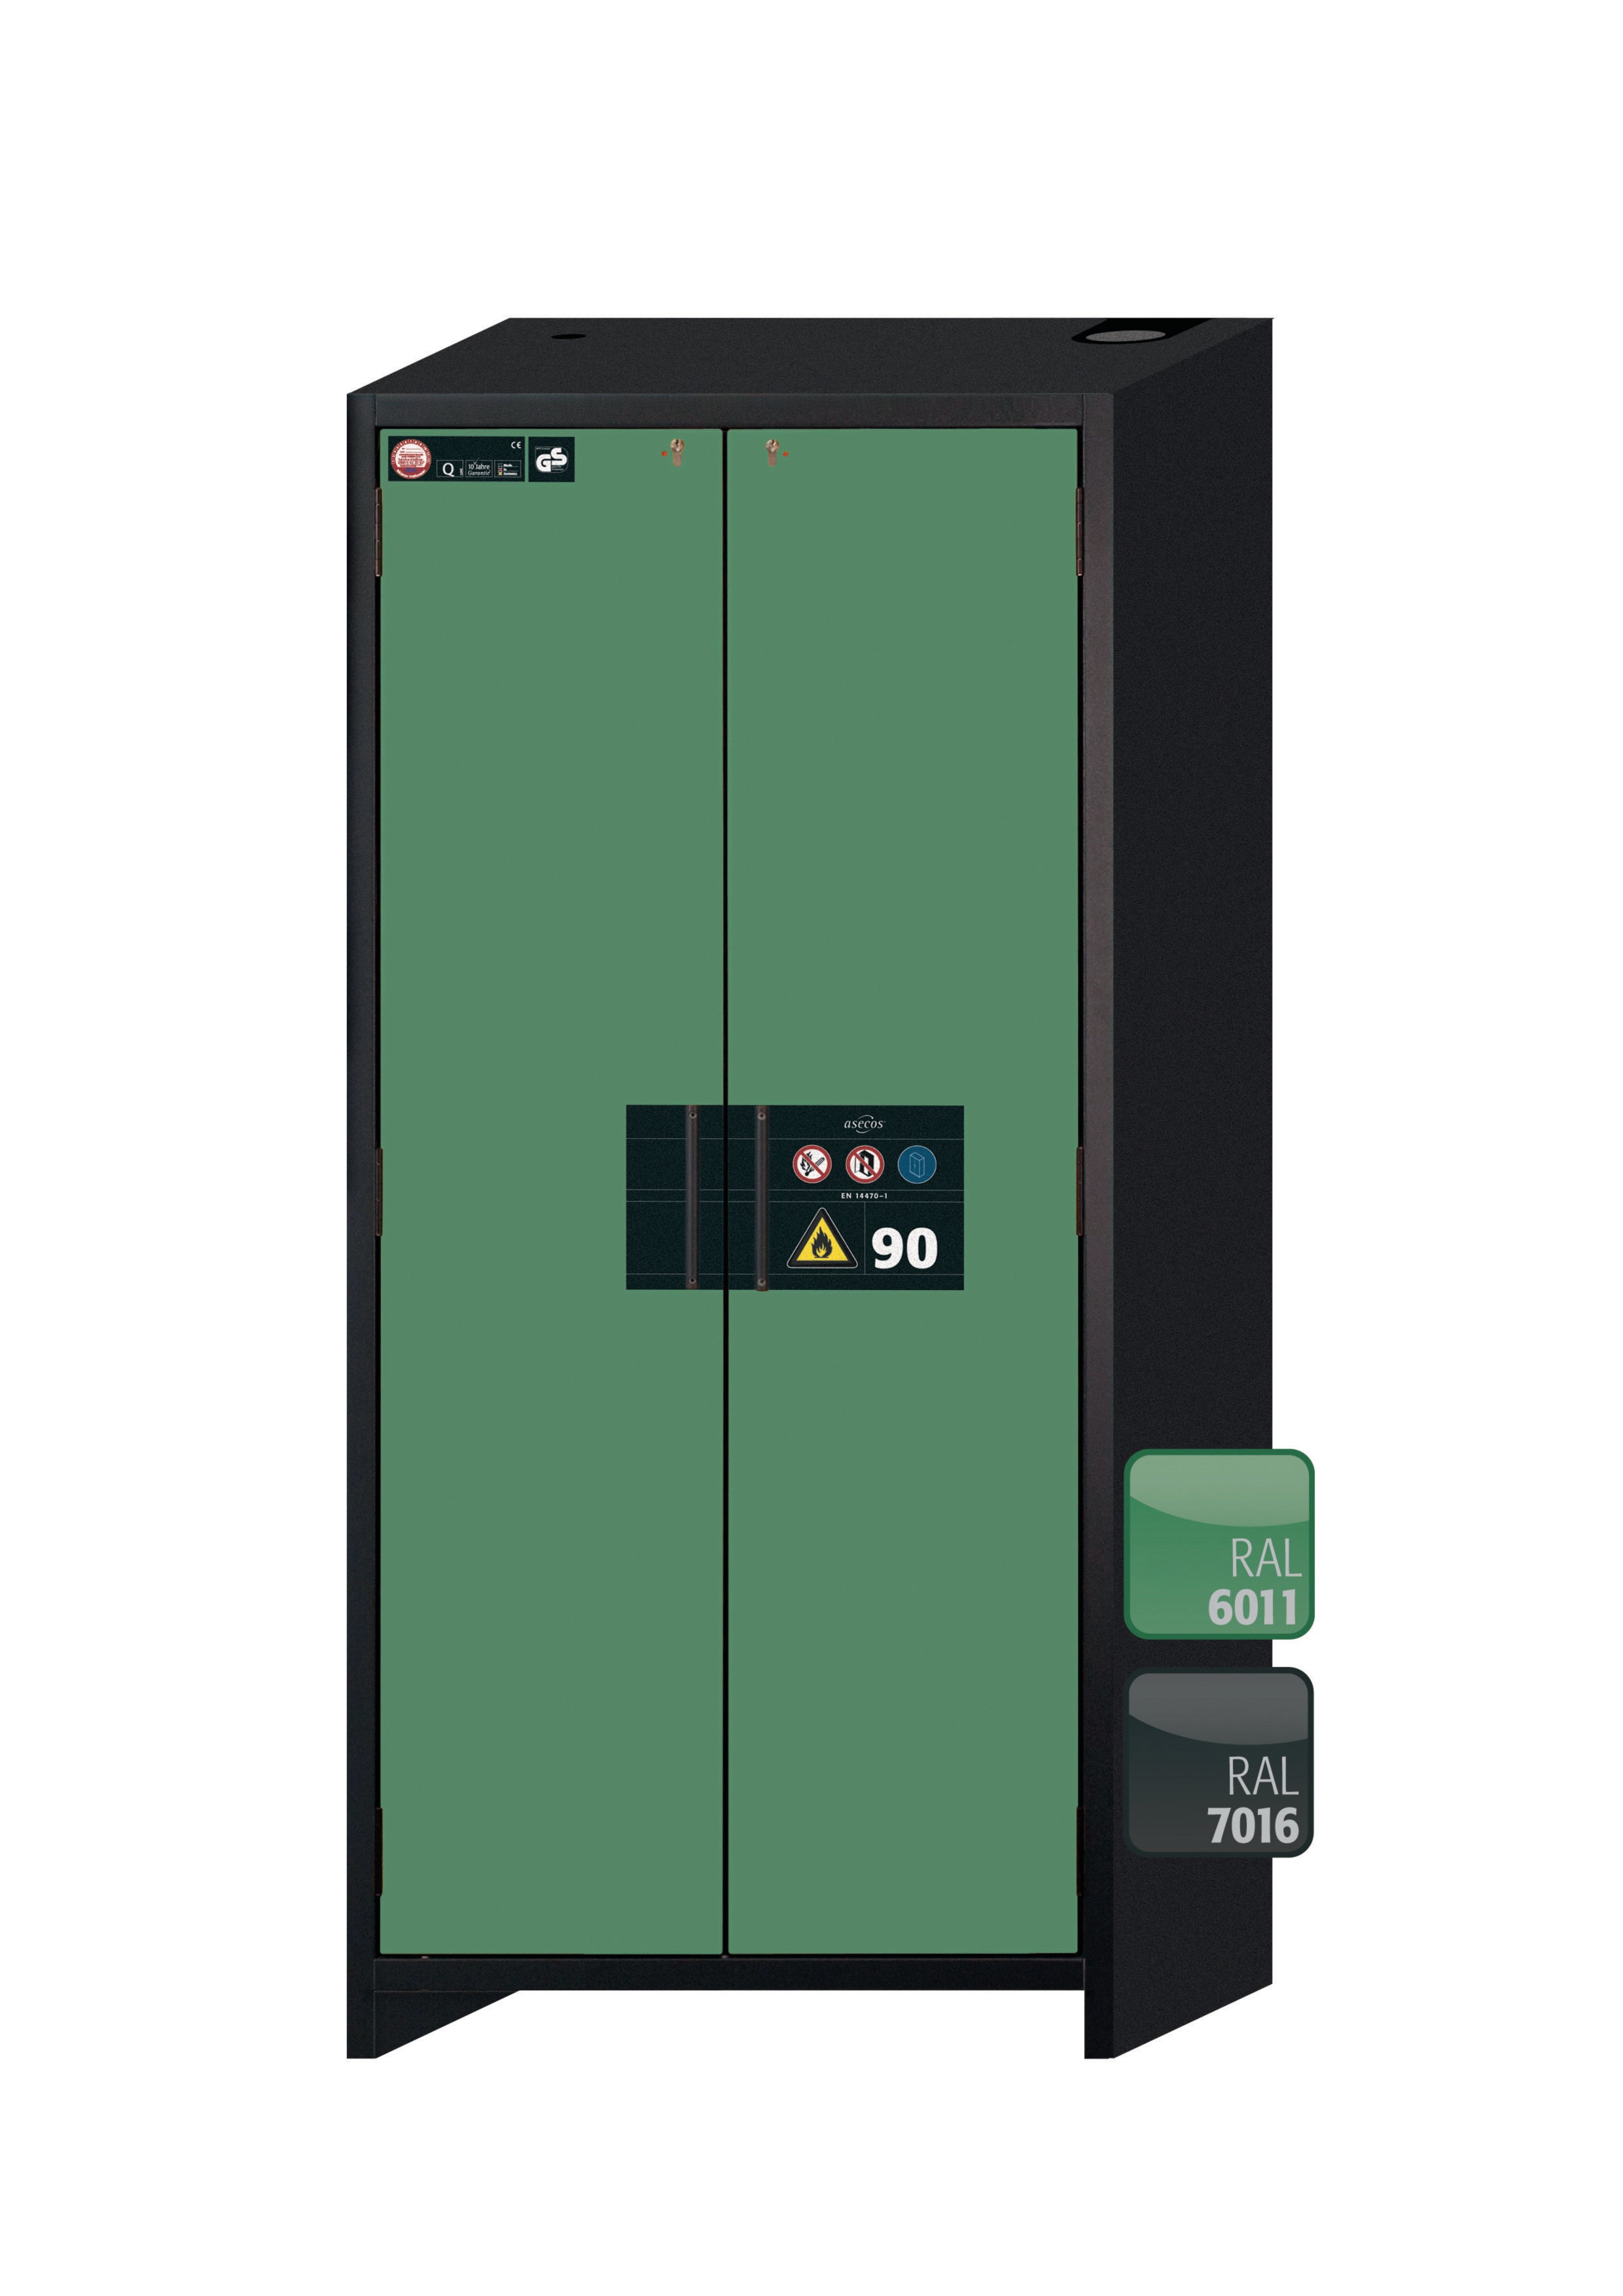 Type 90 safety storage cabinet Q-CLASSIC-90 model Q90.195.090 in reseda green RAL 6011 with 5x drawer (standard) (stainless steel 1.4301),